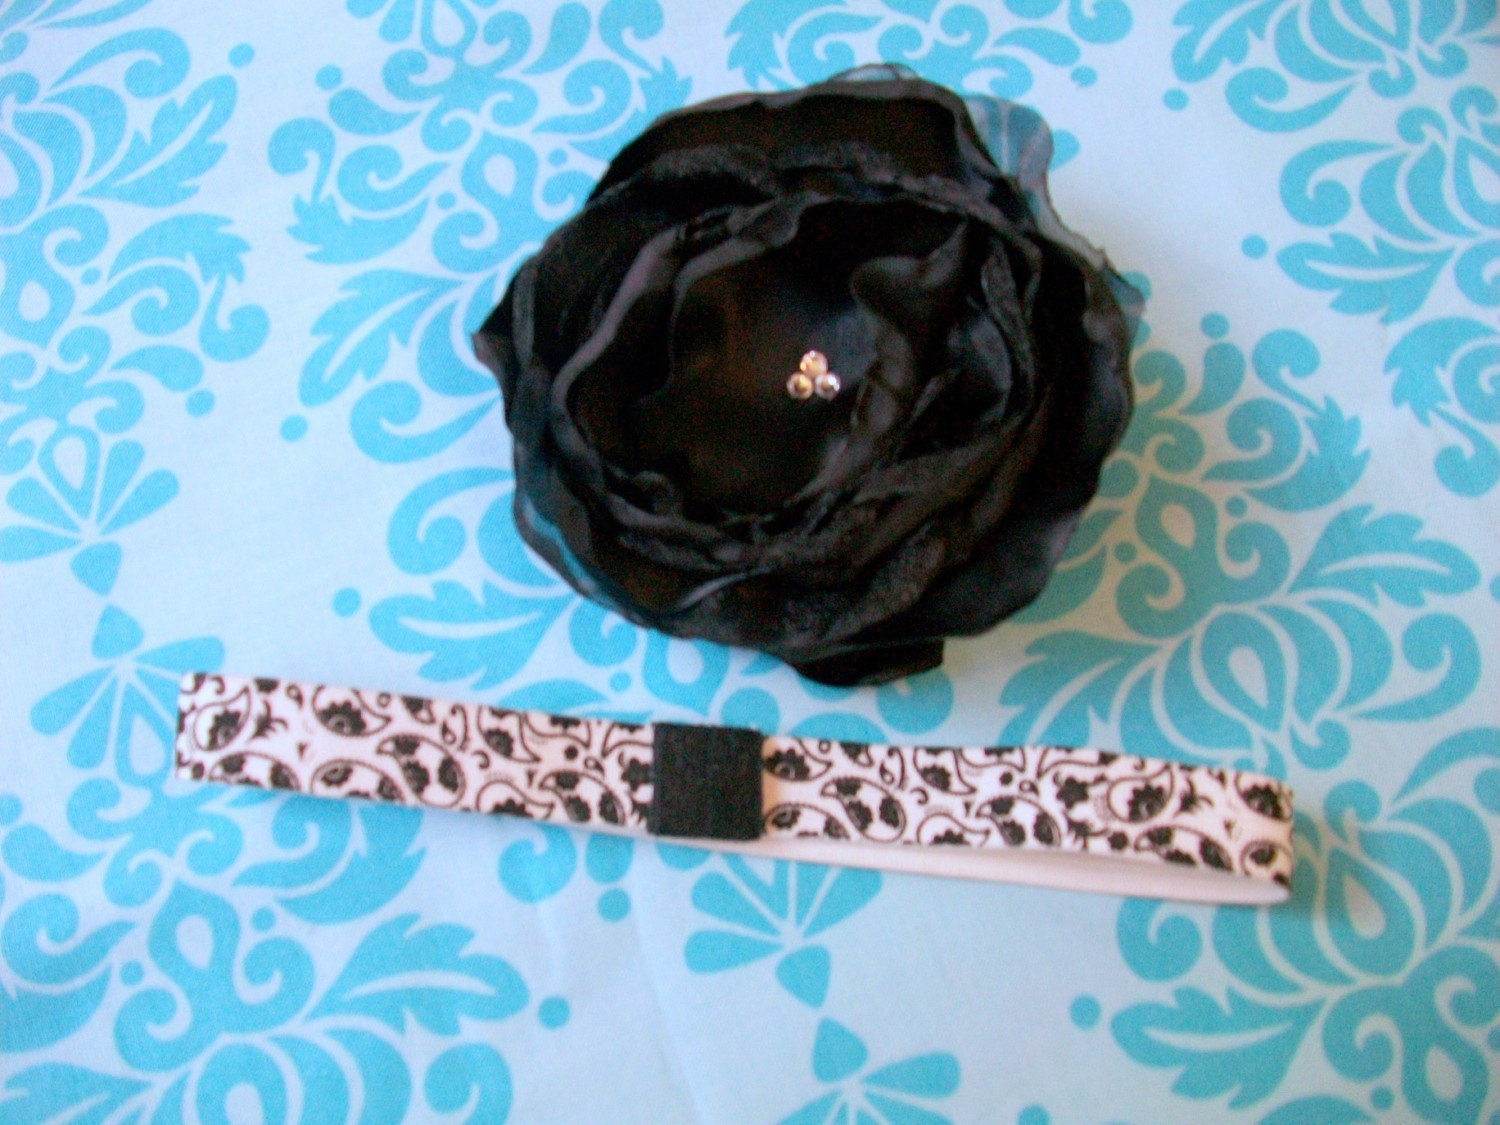 FREE SHIPPING--Sweet and Sassy Beautiful Black Handmade Silk Flower on Interchangeable Soft Satin Stretch White and Black Paisley Headband ALL SIZES available-- Newborn, Baby, Toddler through Adult